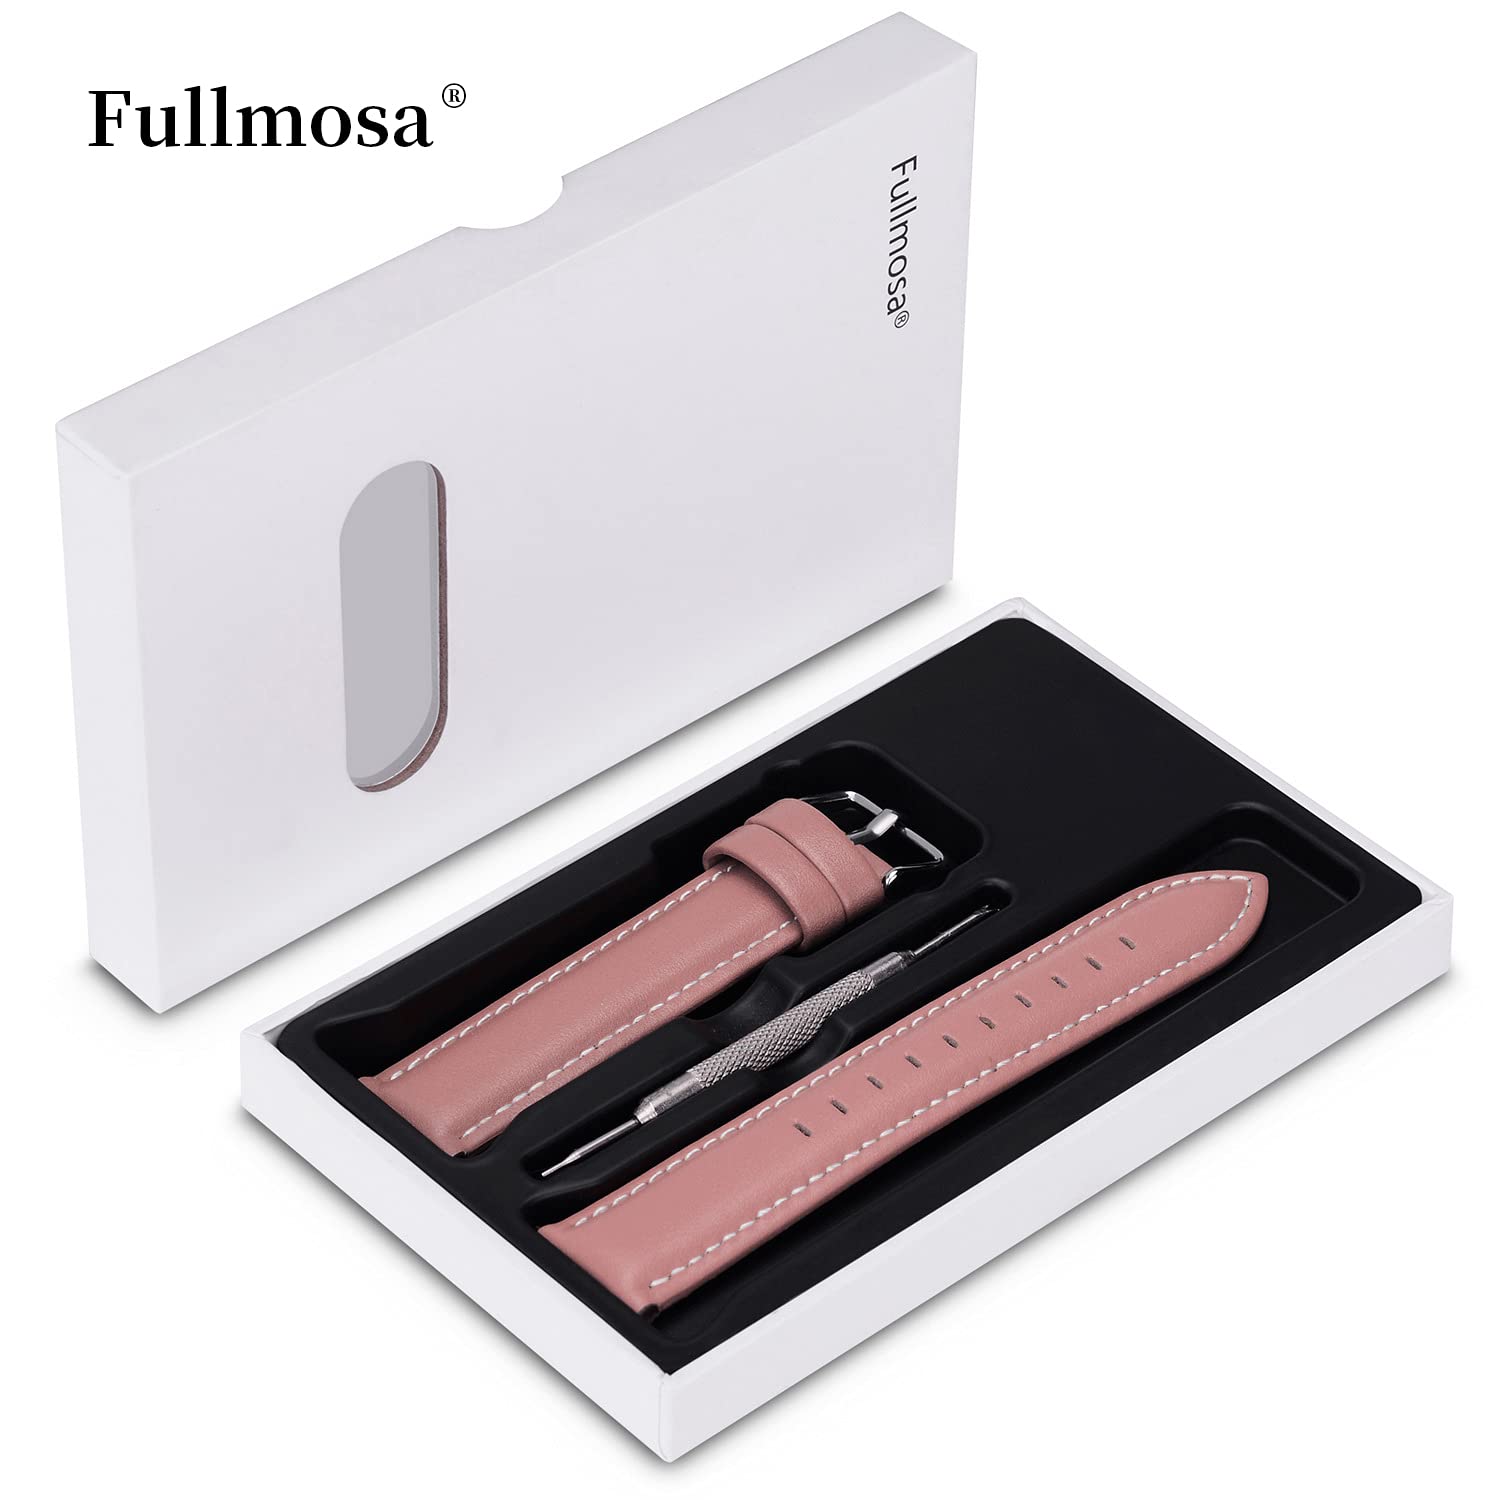 Fullmosa Watch Straps 20mm, Axus Series Leather Strap Replacement Watch Strap with Stainless Steel Metal Clasp for Men Women 14/16/18/20/22/24mm, Pink 20mm